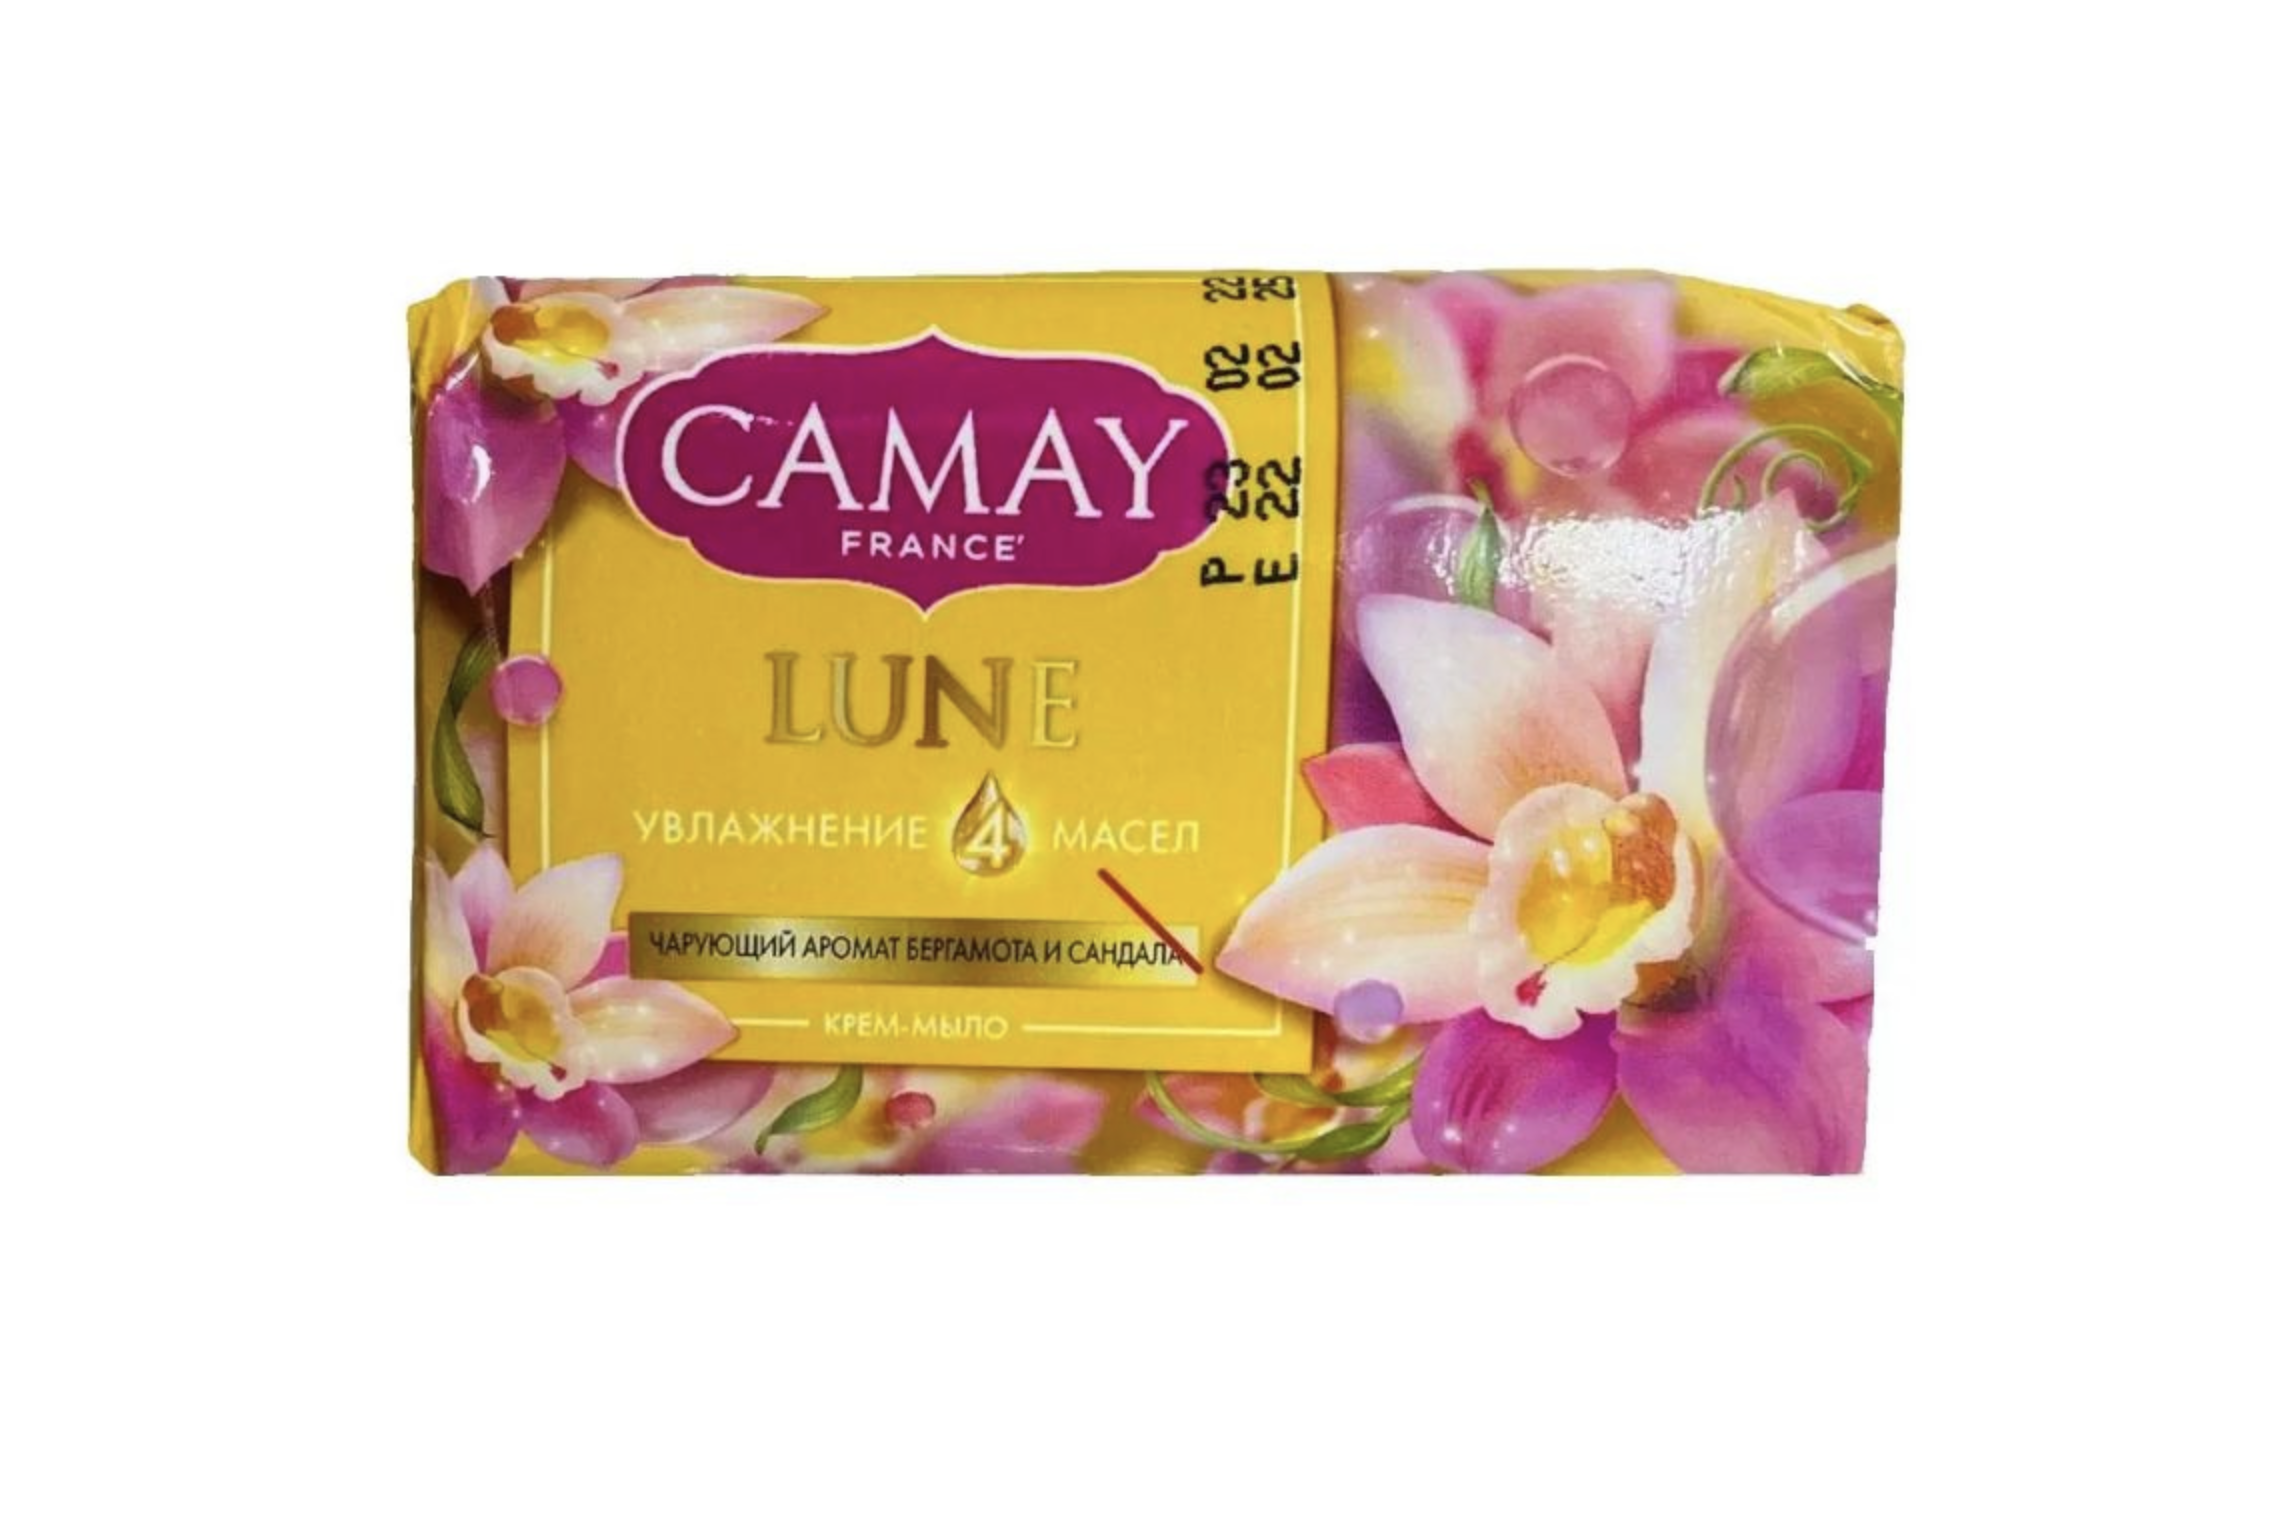   / Camay France -   Lune    85 